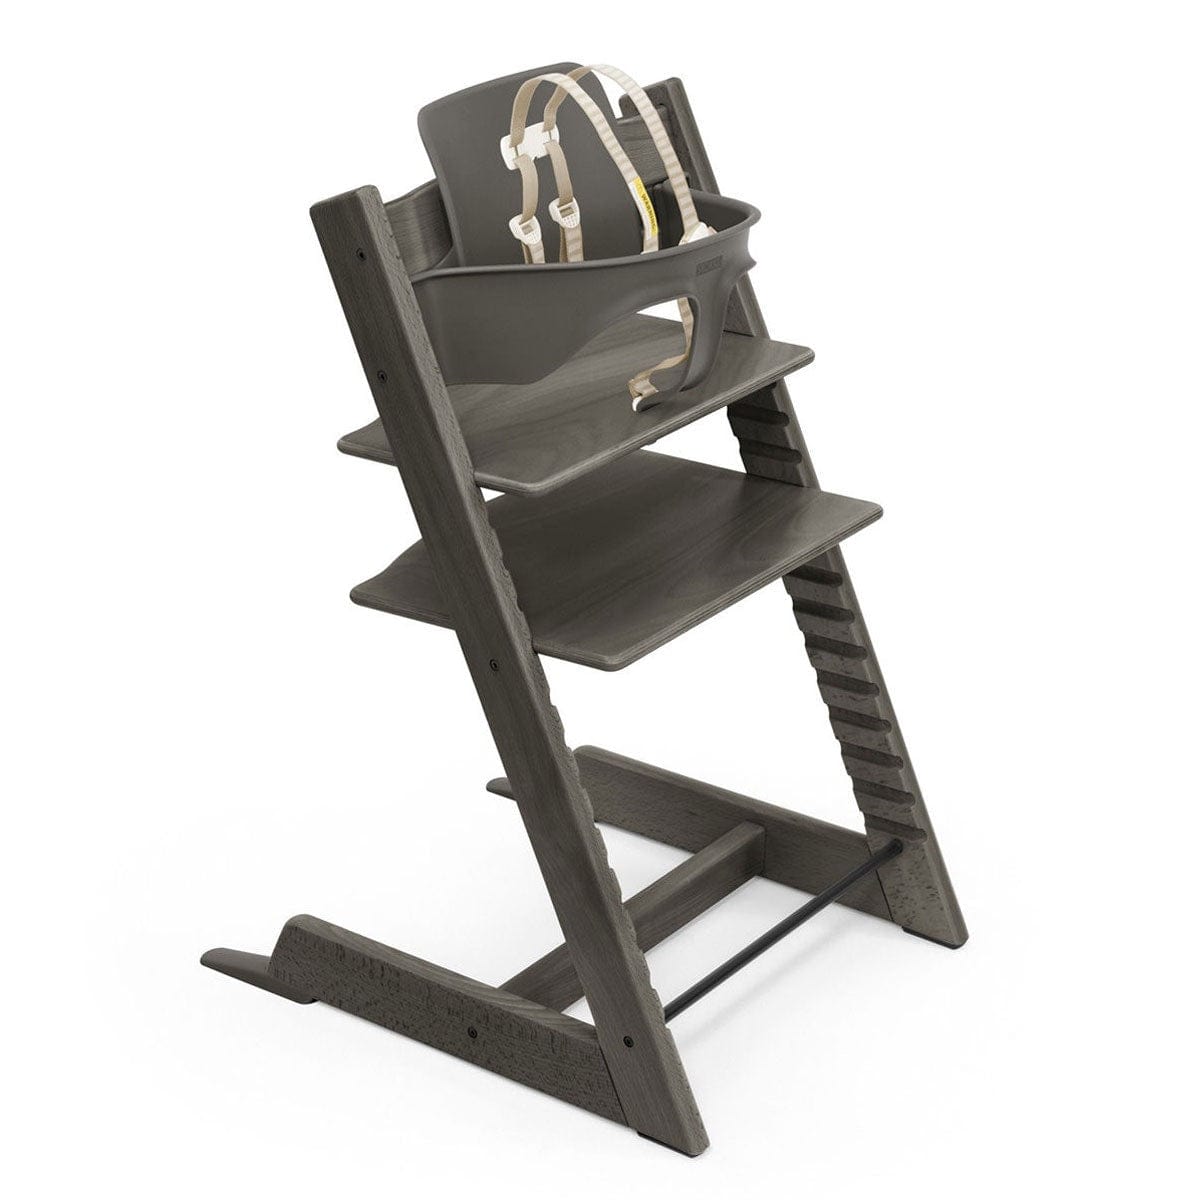 Stokke High Chairs & Booster Seats Hazy Grey Stokke Tripp Trapp® High Chair Bundle